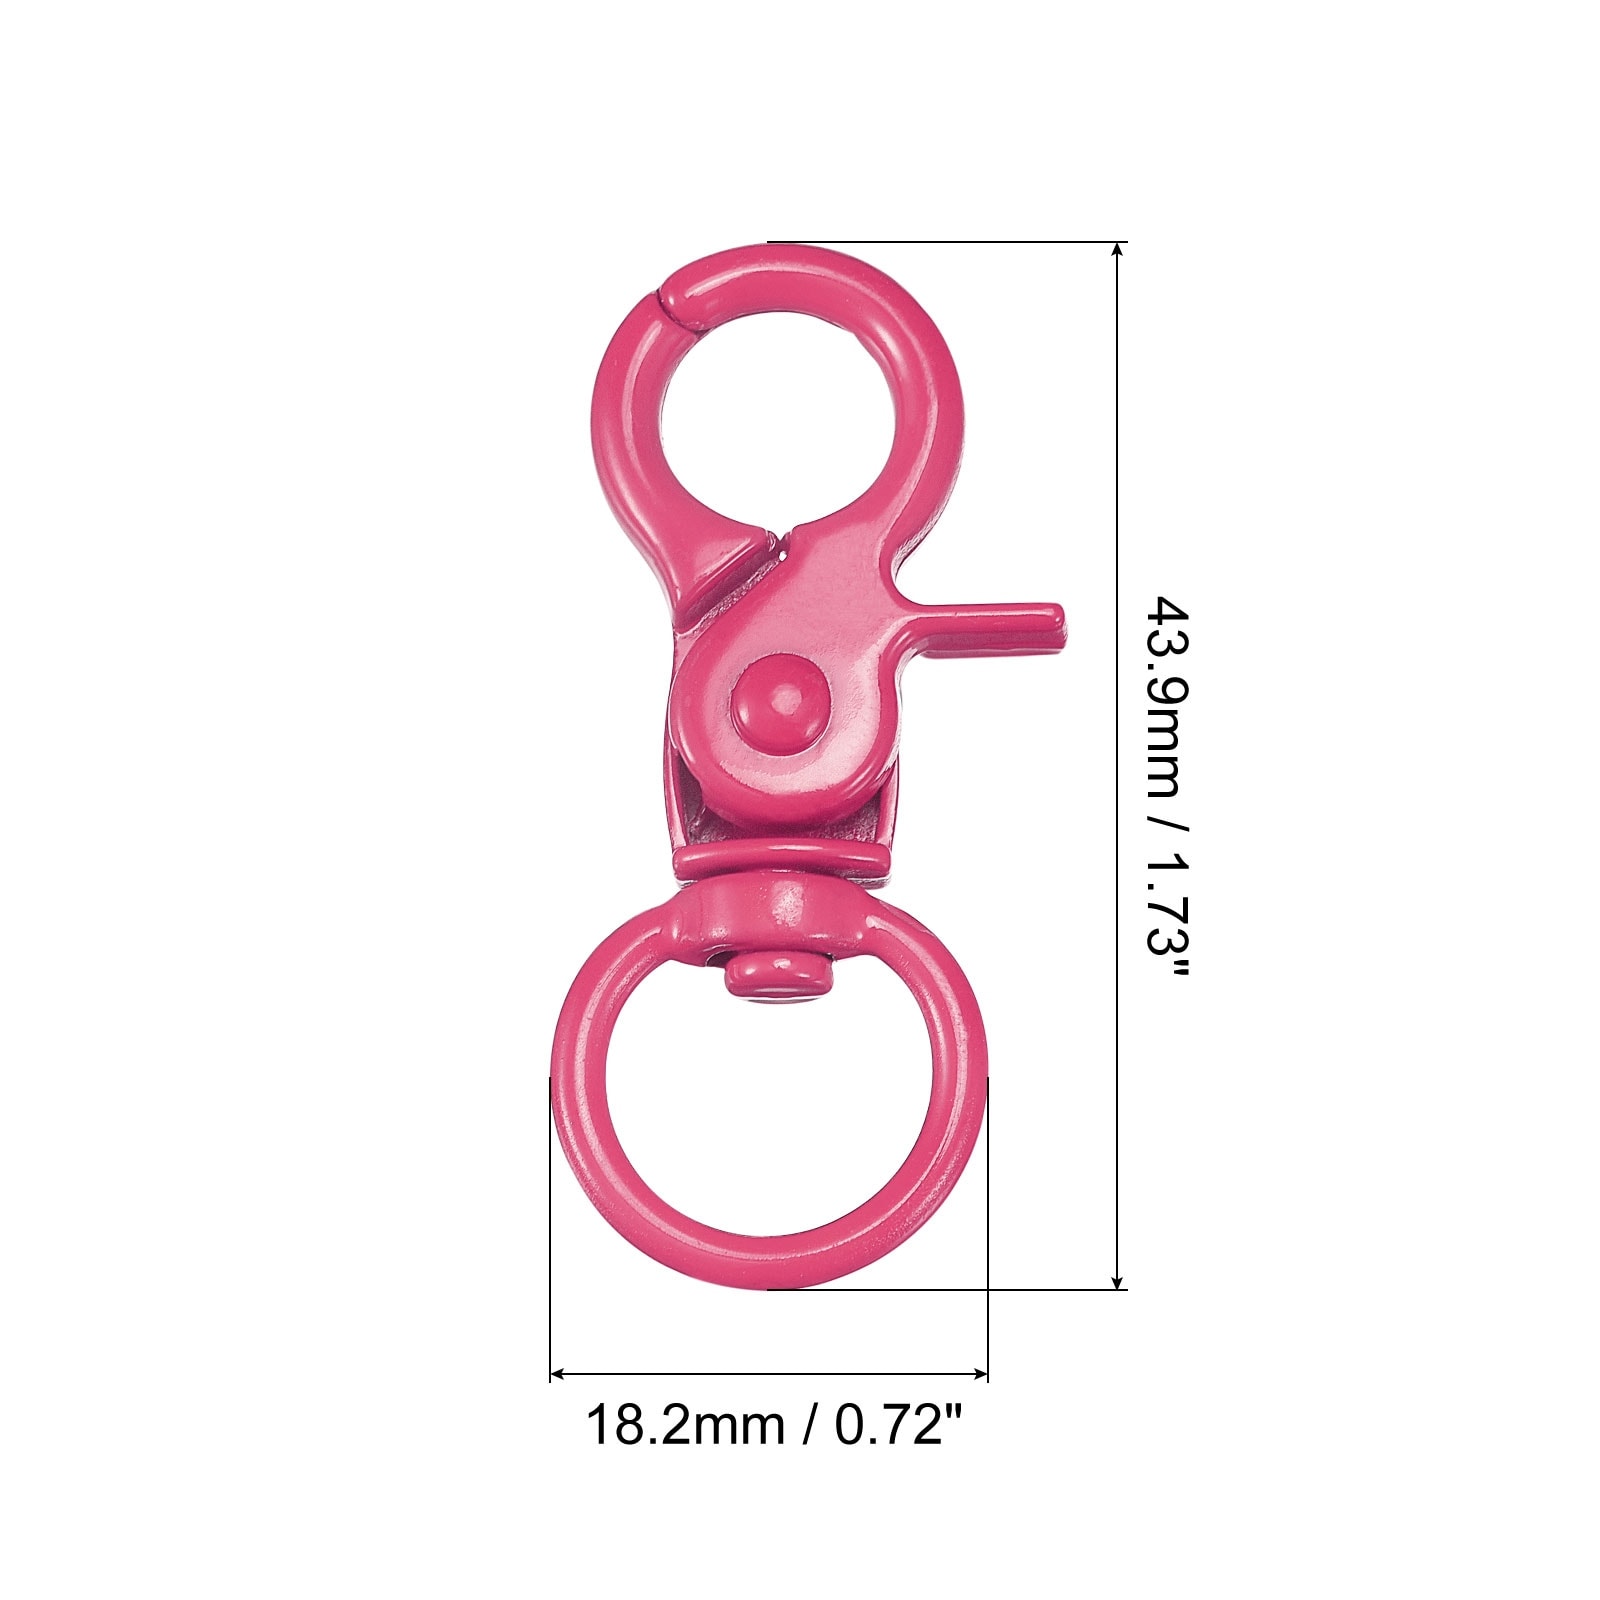 Unique Bargains 44mm Swivel Clasps Lanyard Snap Hook Claw Clasp for DIY Red, 8pcs - Red - 43.9mm